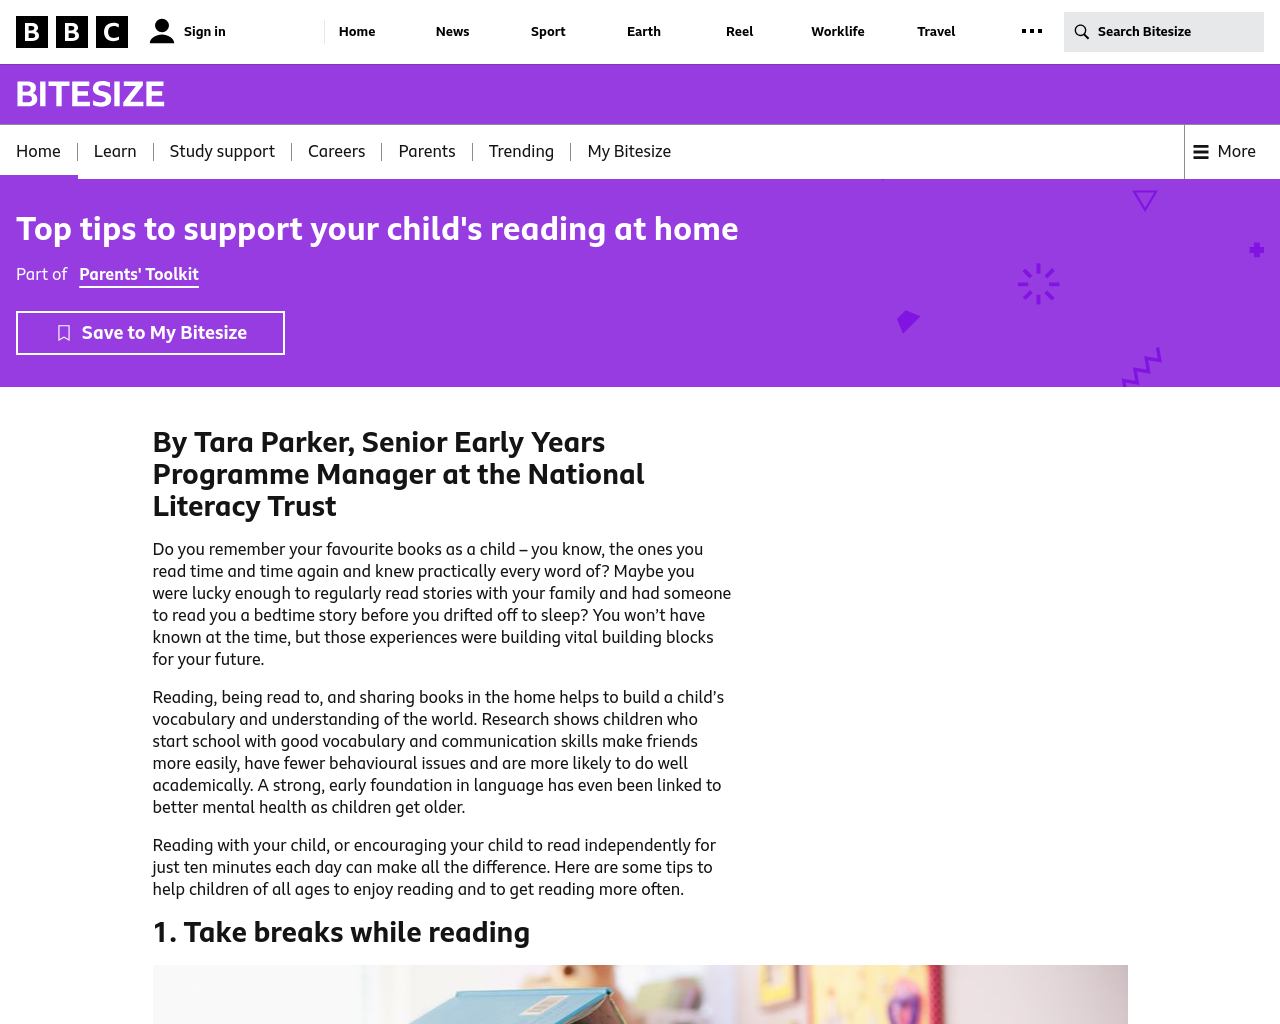 BBC Bitesize - Top Tips to Support Reading at Home